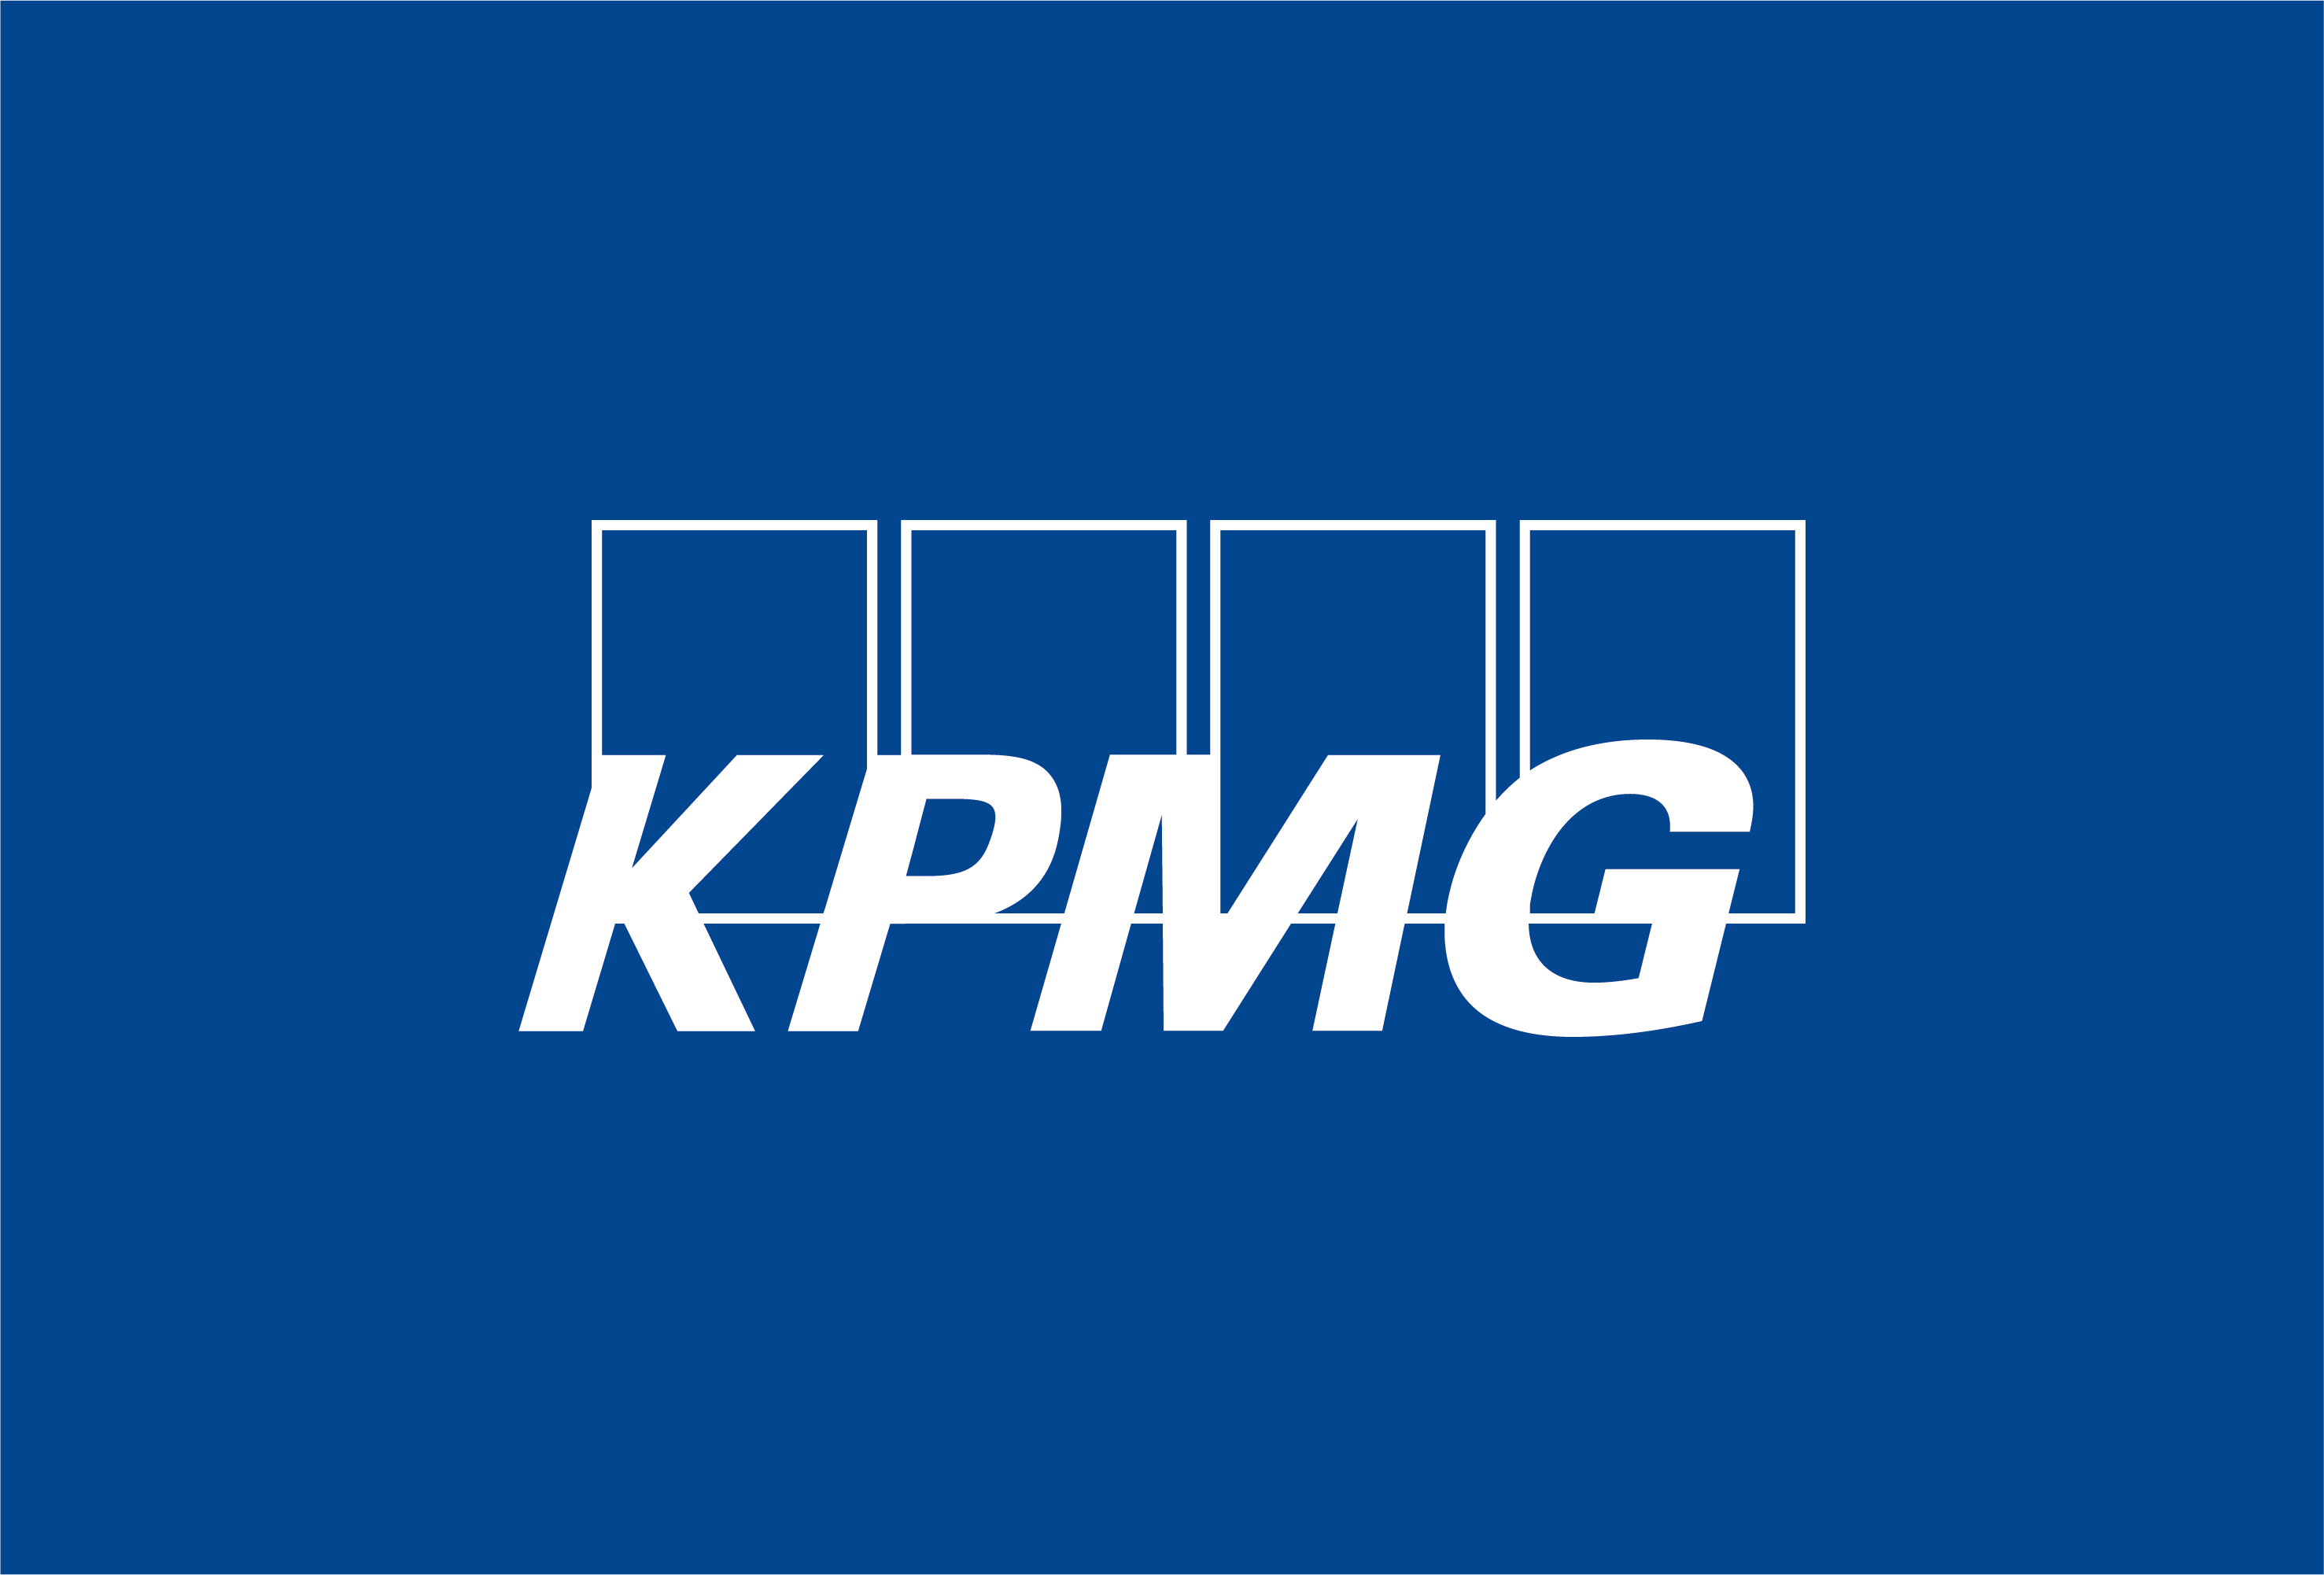 KPMG Colombia